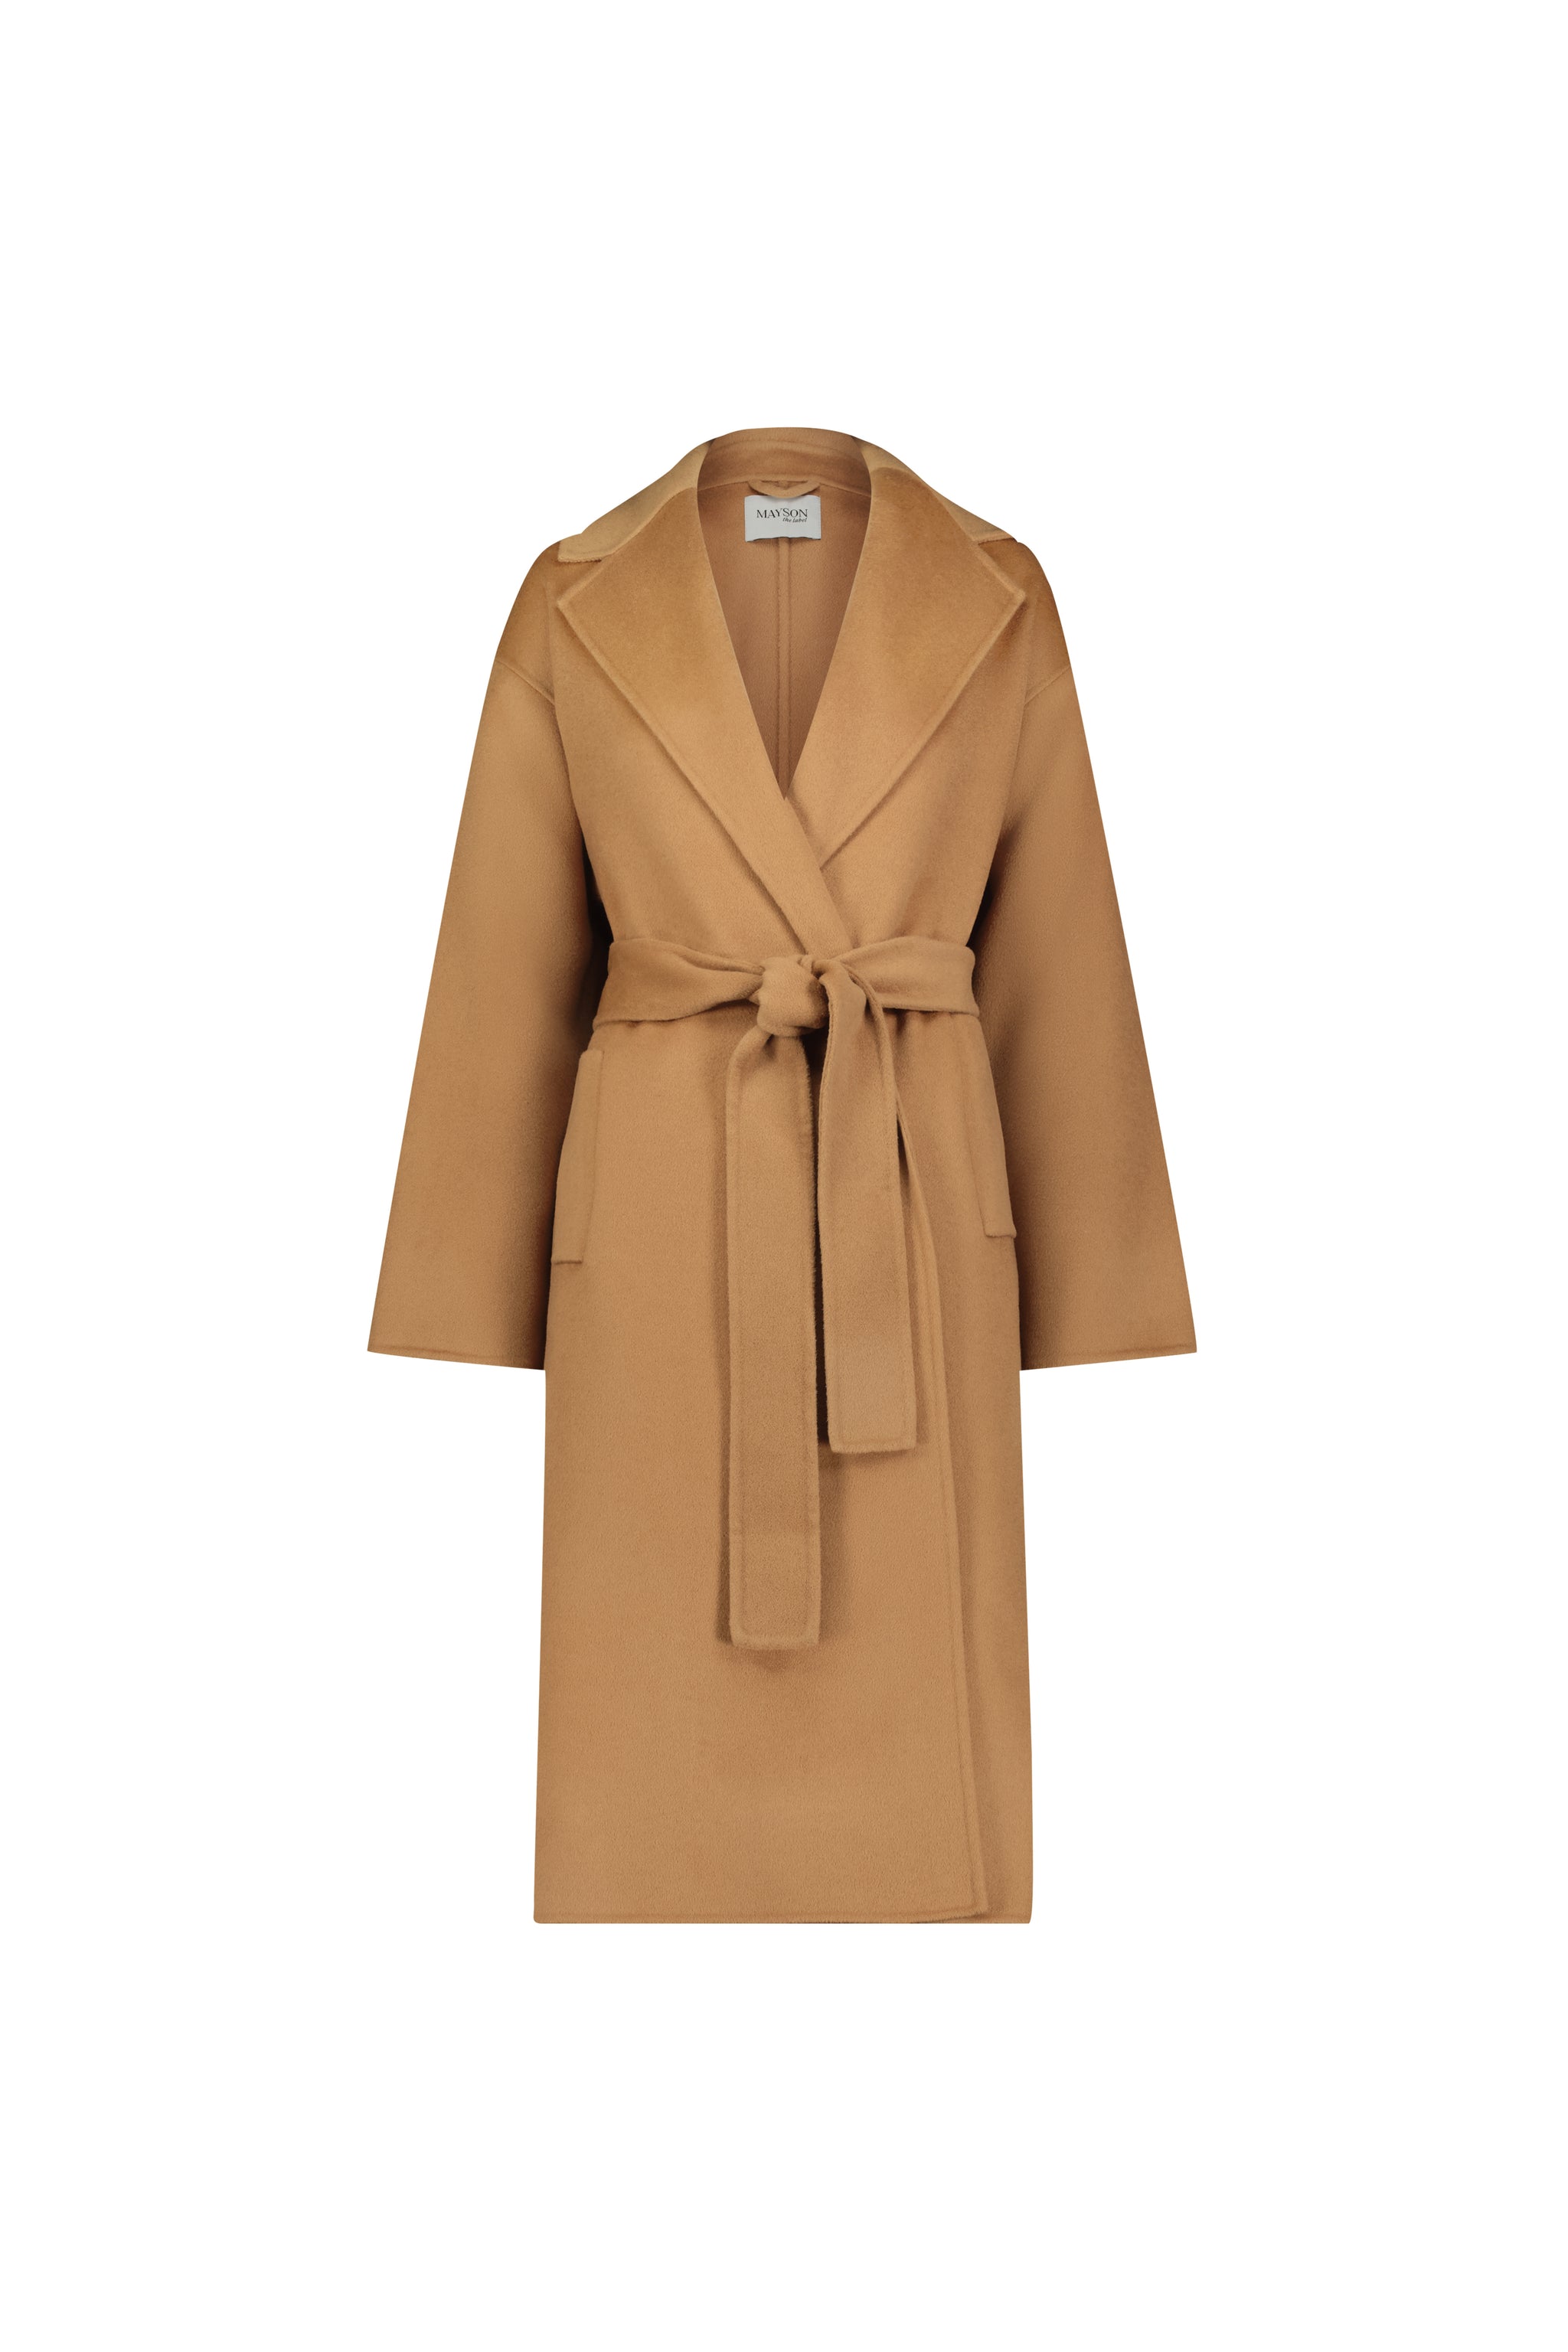 wool cashmere double-faced wrap coat in camel featured